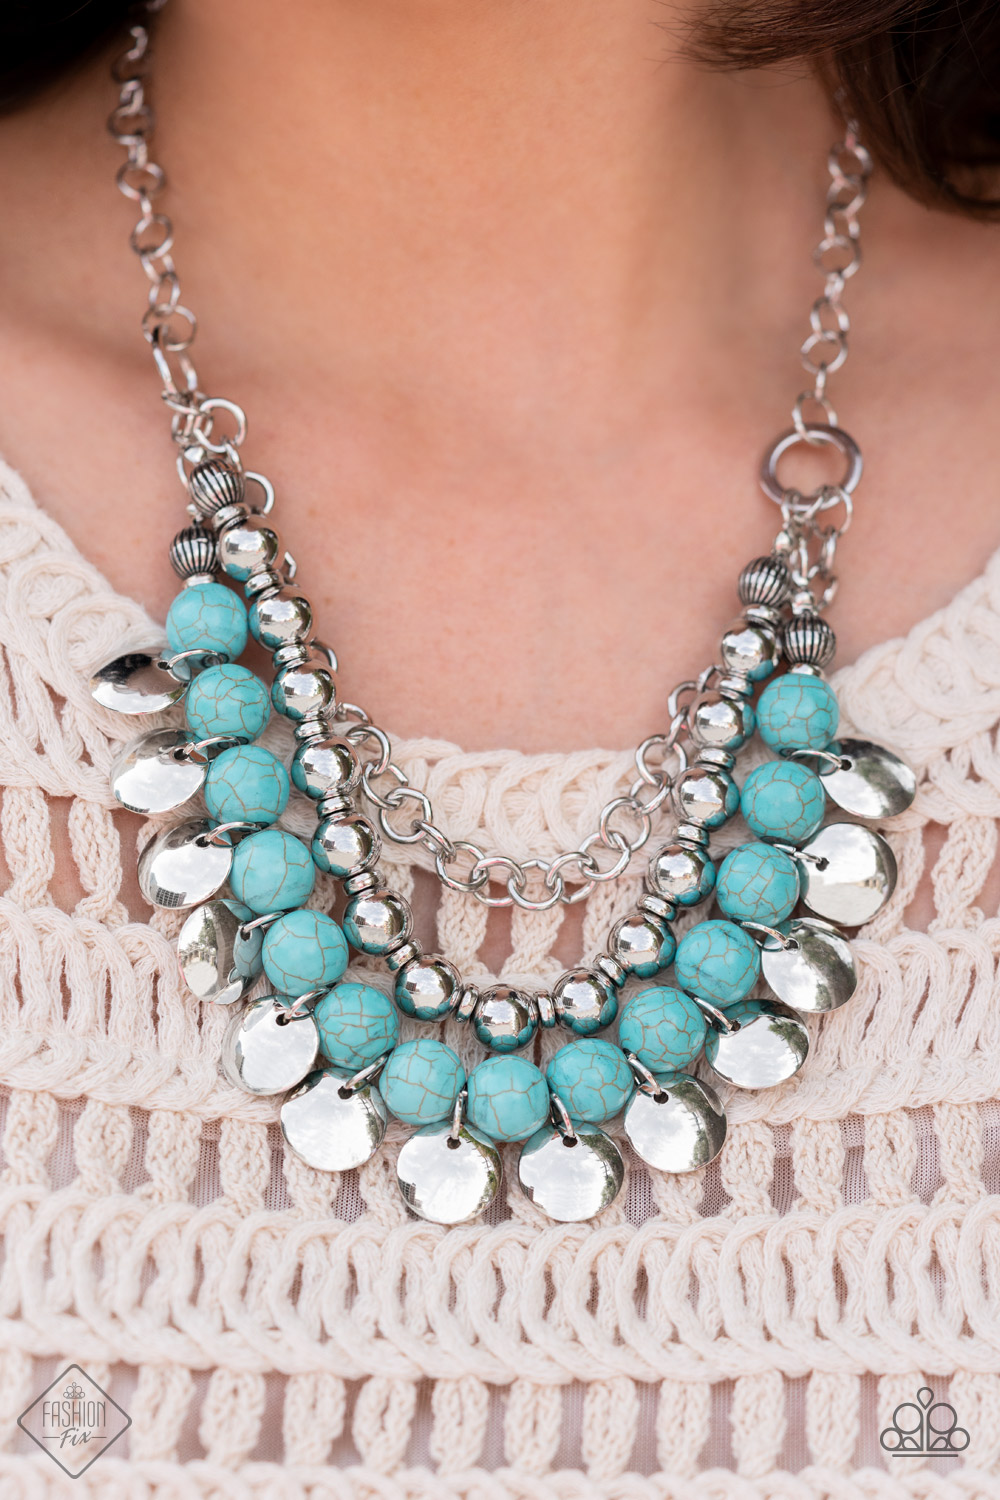 Leave Her Wild - Blue - Paparazzi Accessories Necklace